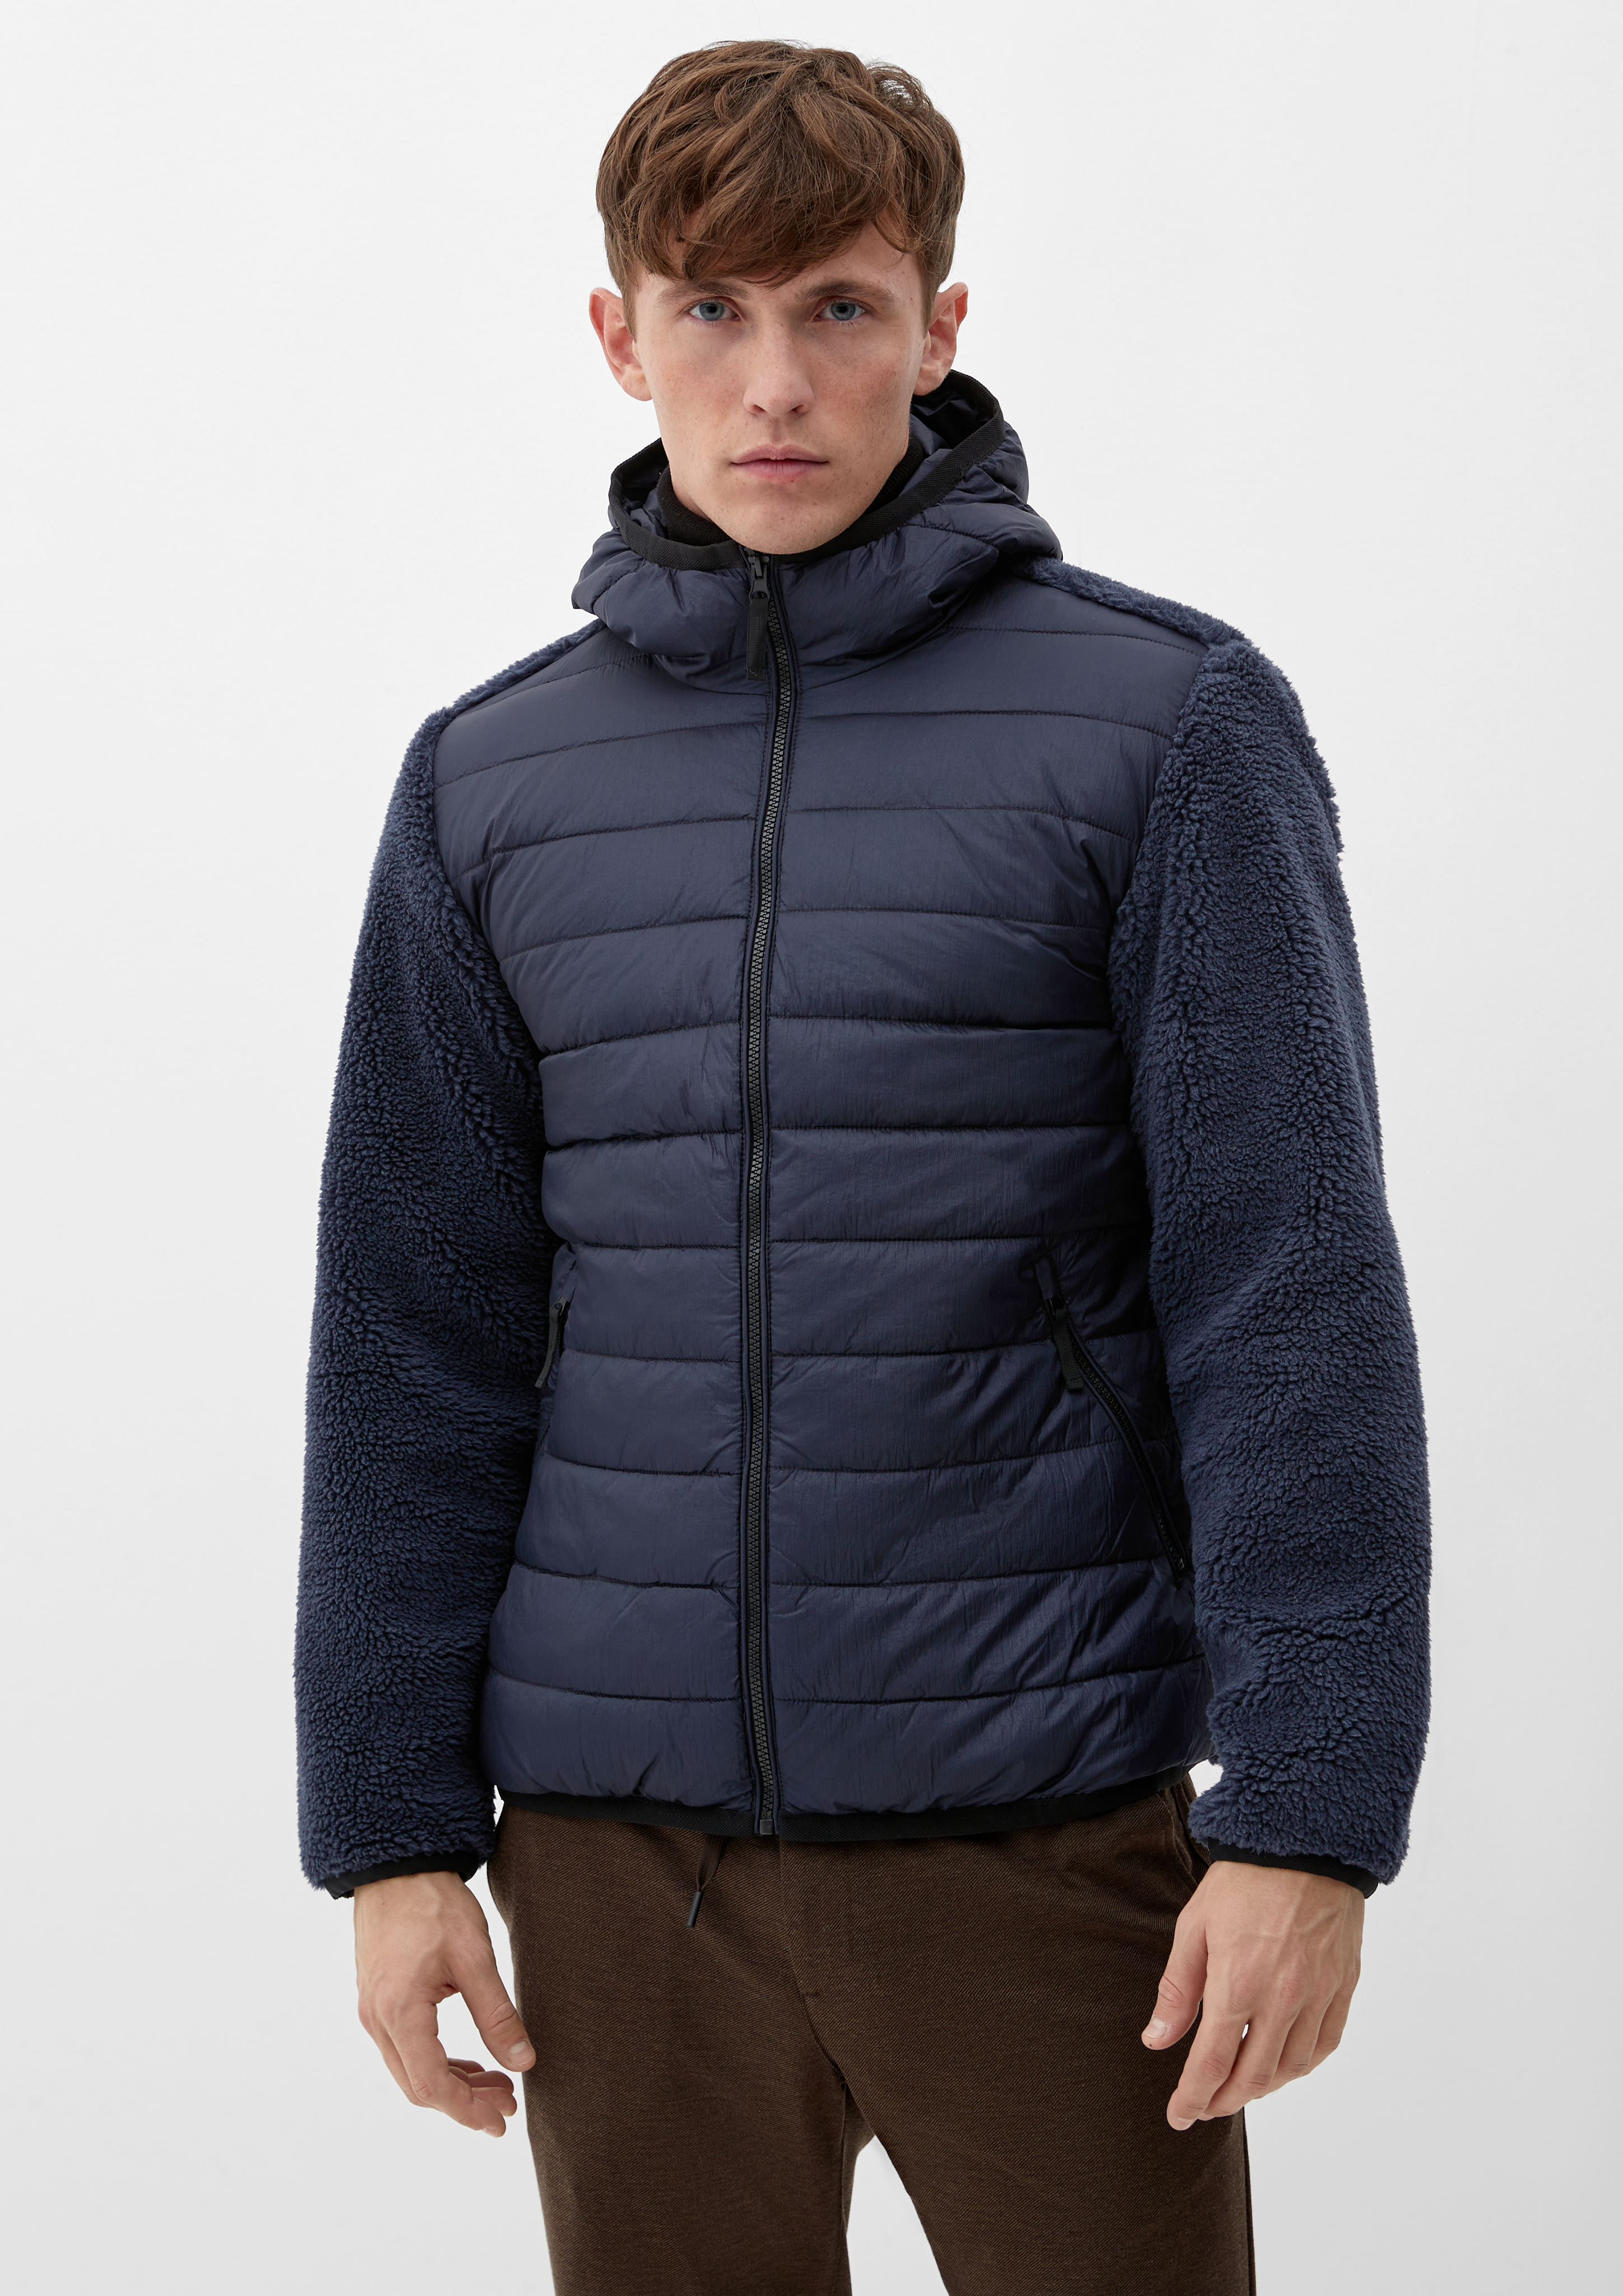 materials mix a navy in of Jacket -